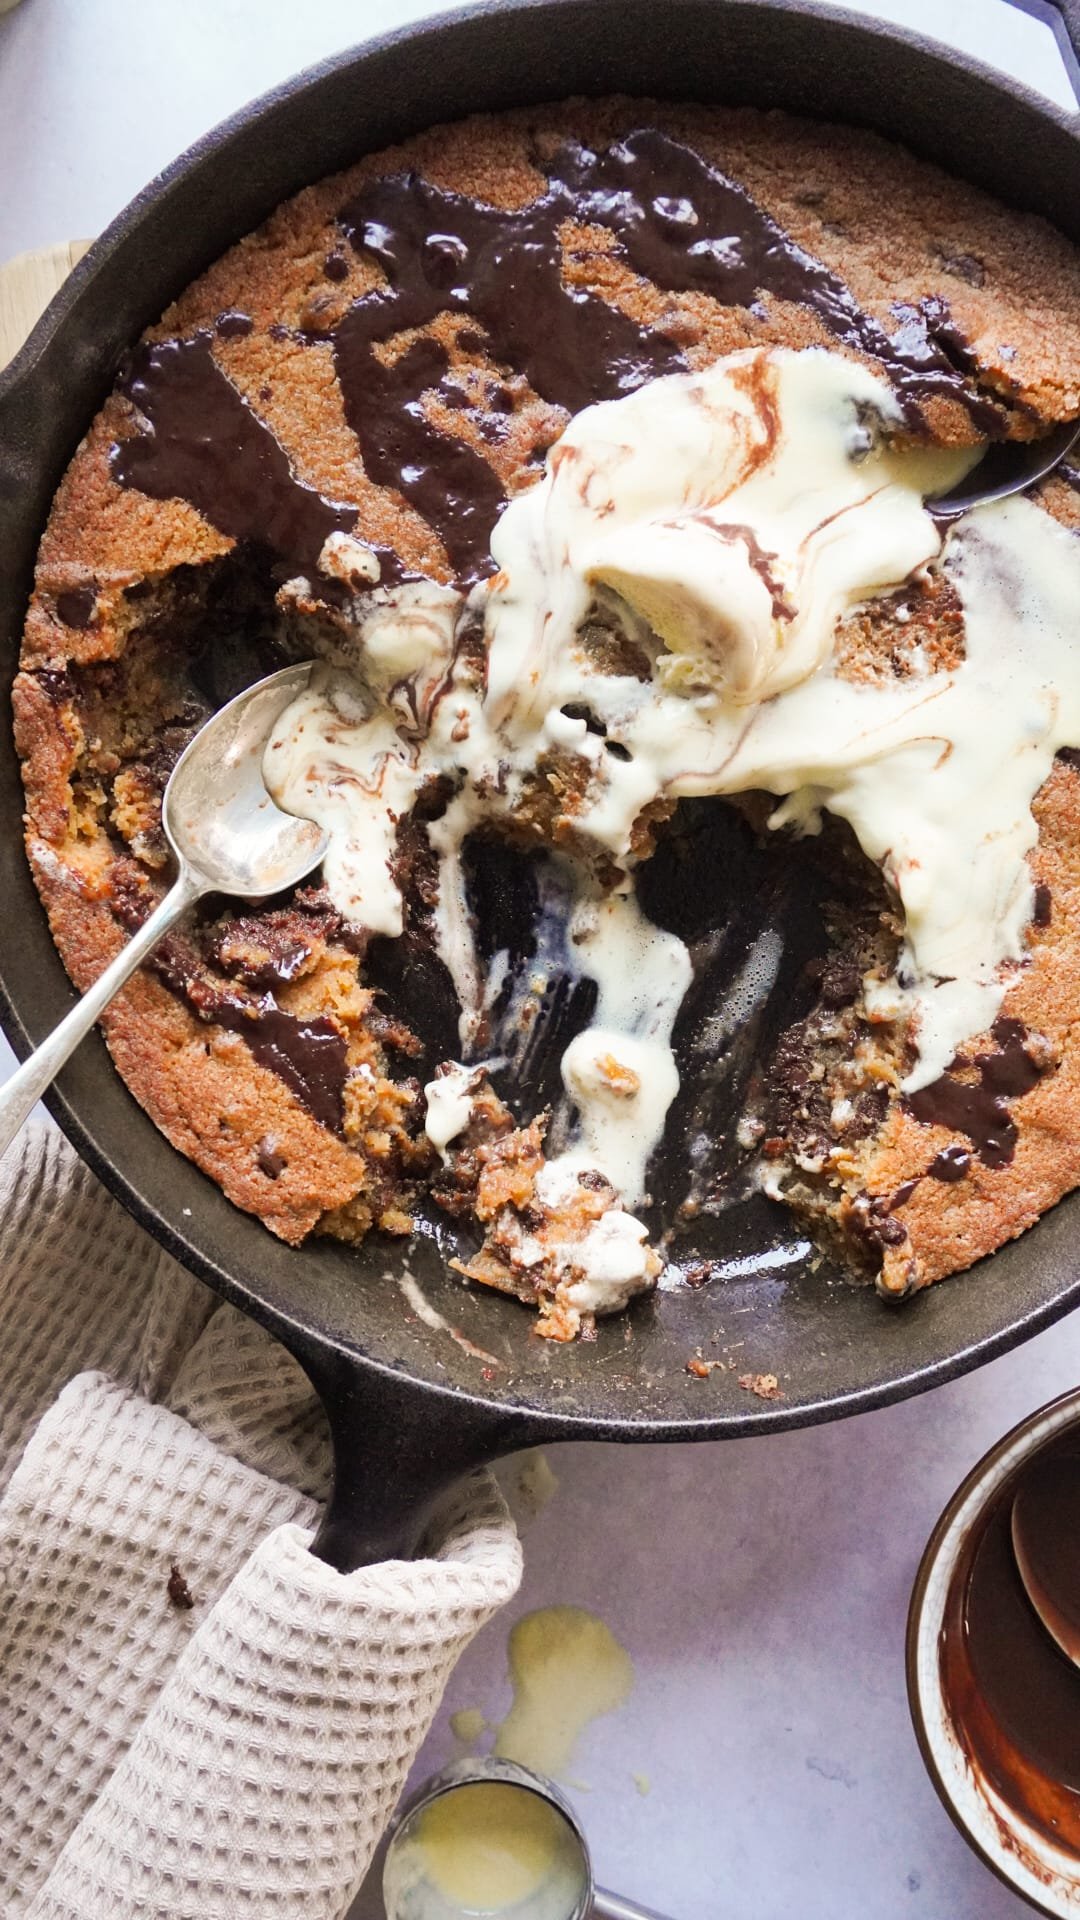 Chocolate chip skillet served with ice cream